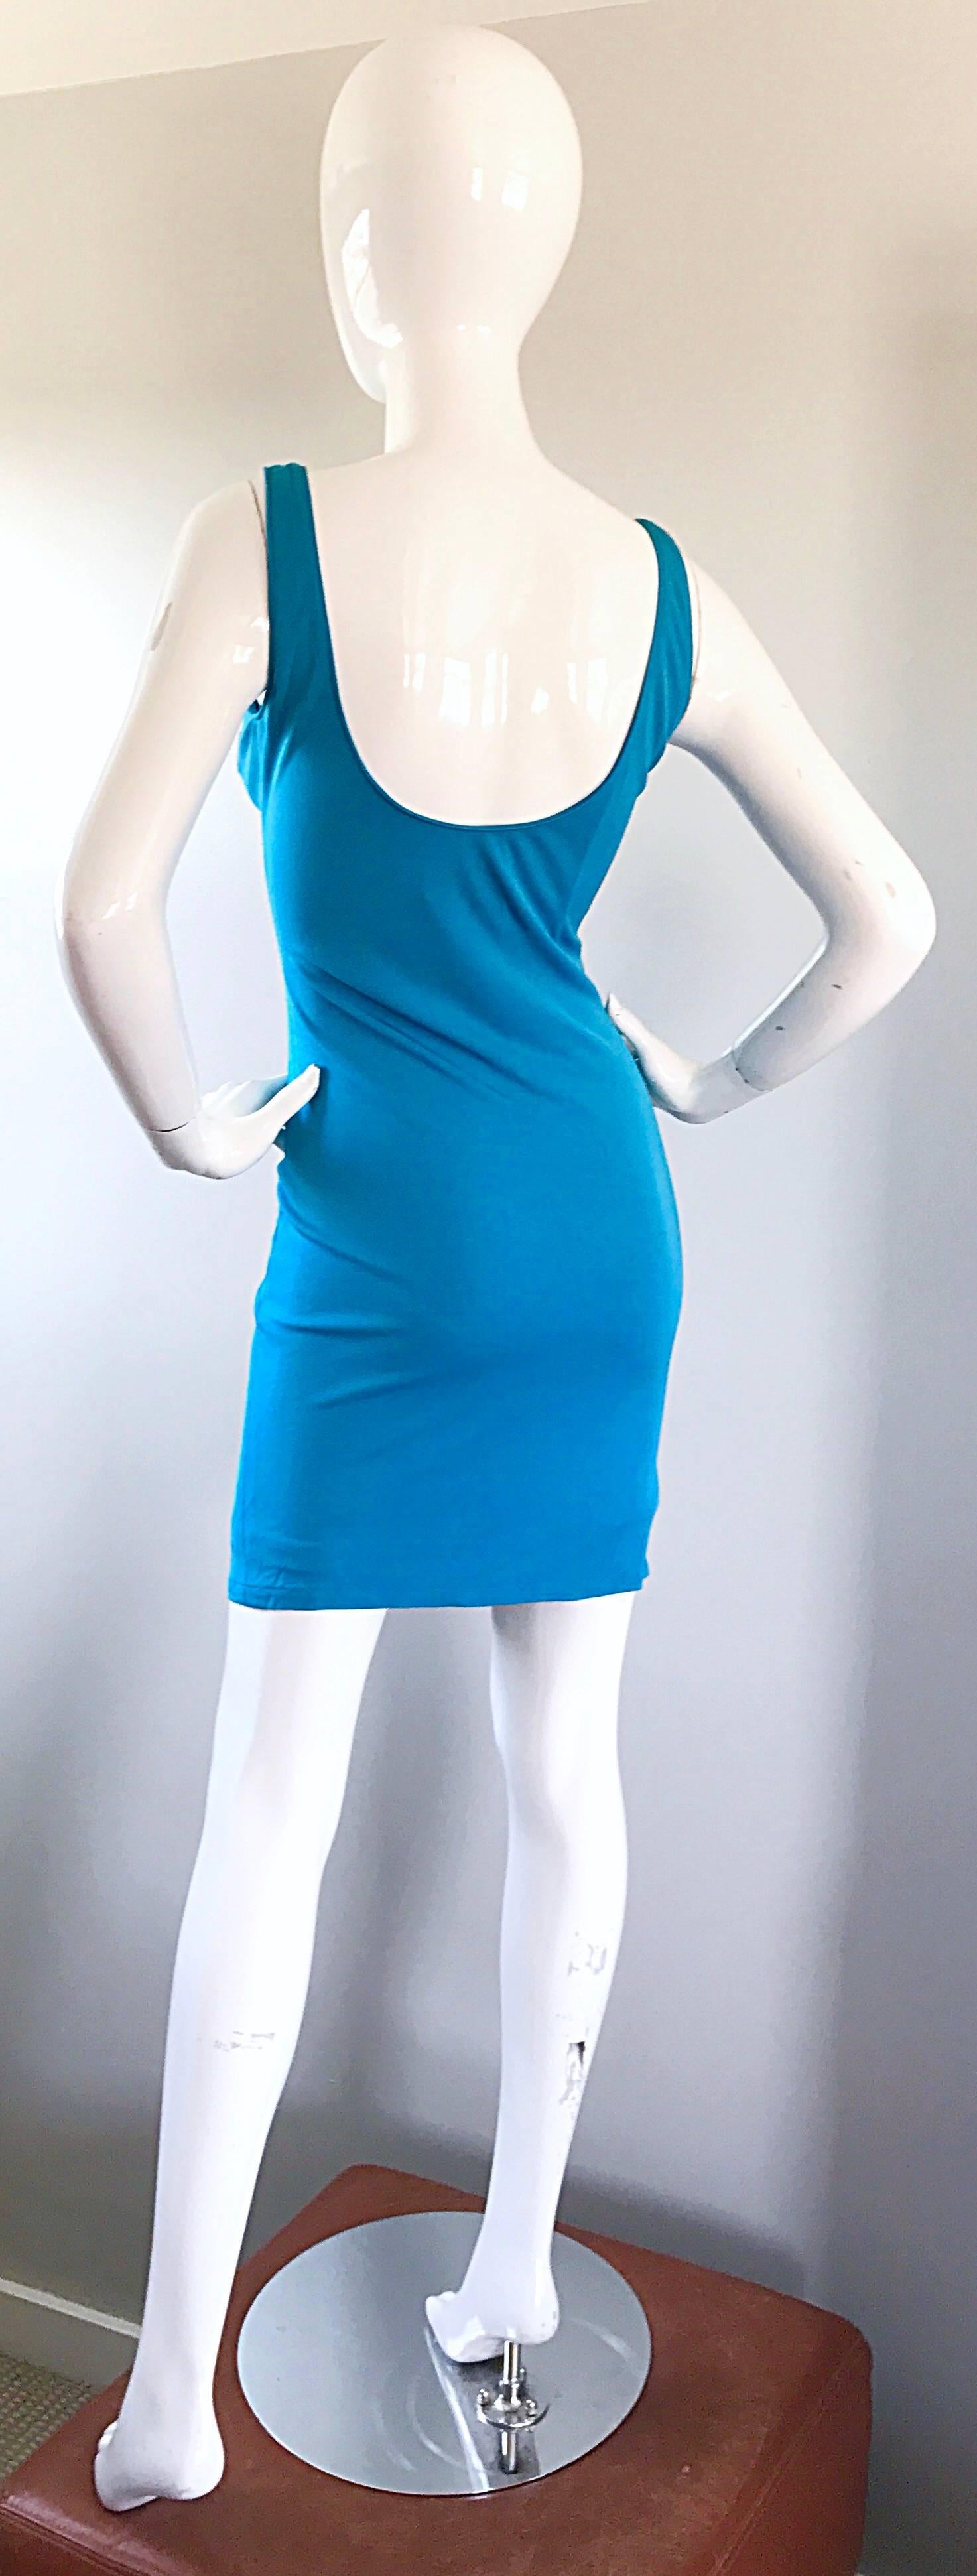 Documented C.D. Greene Turquoise Teal Blue Vintage Mirrored Bodycon Beaded Dress 4